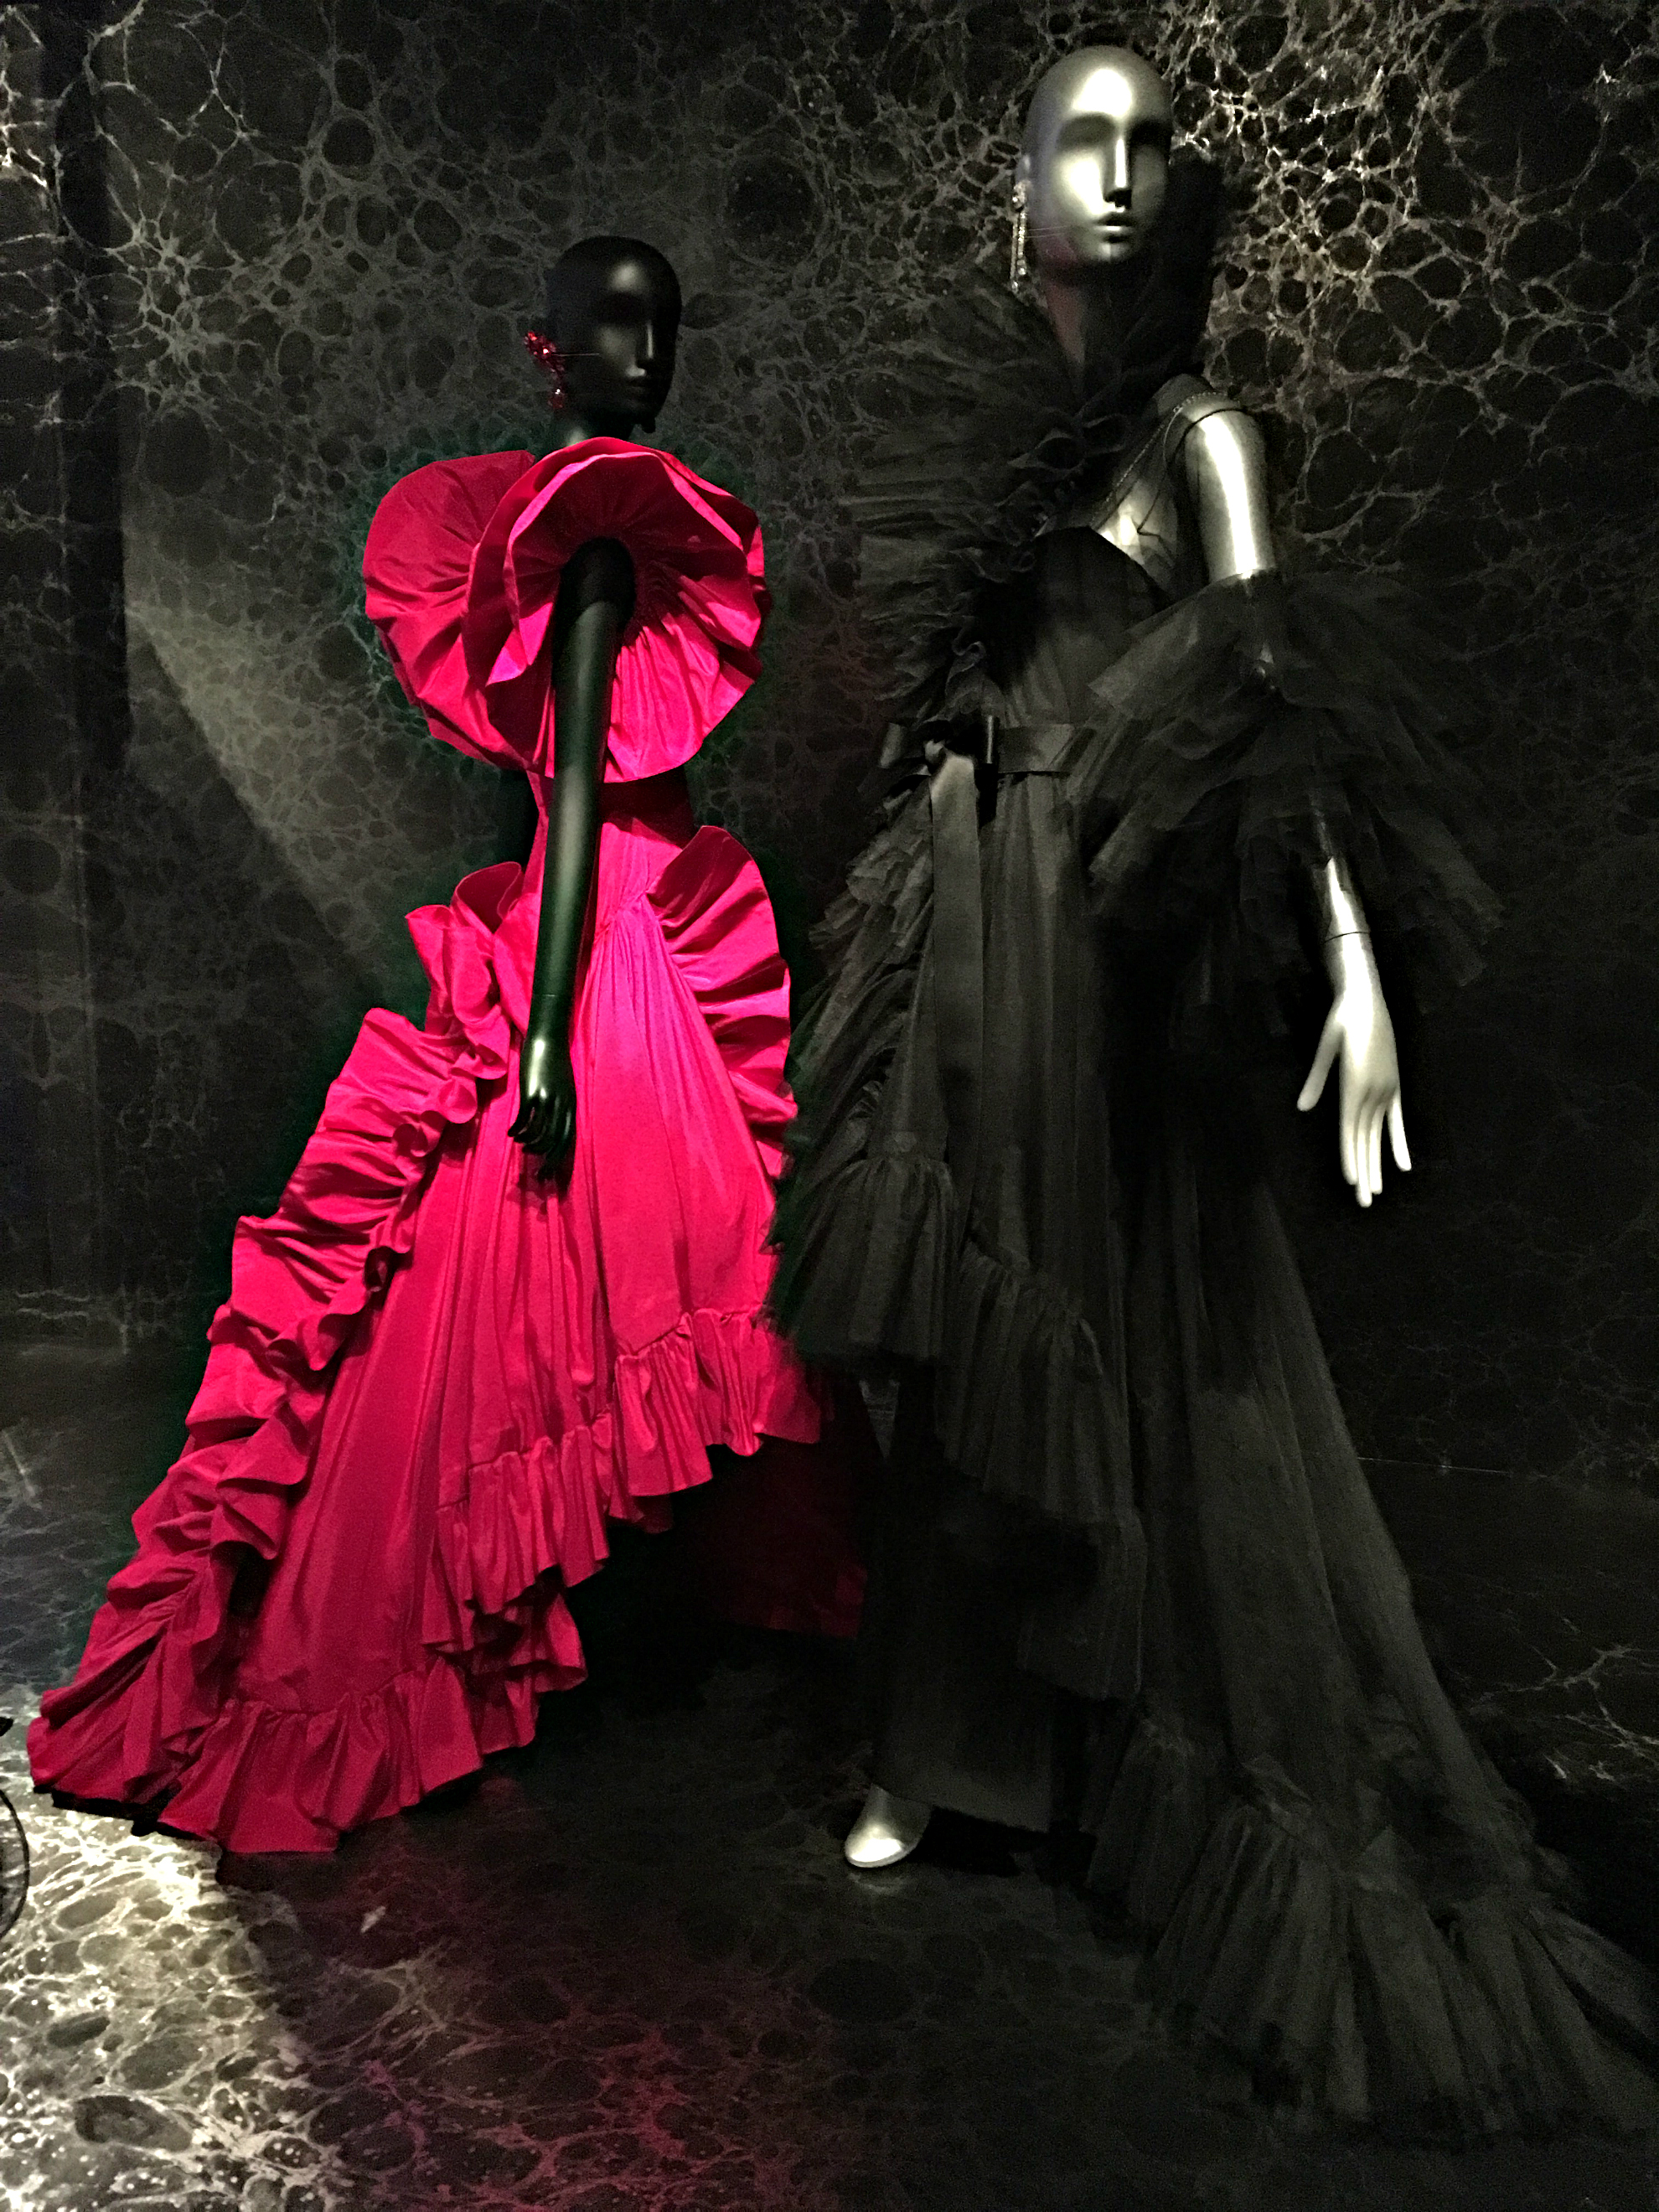 jacqueline-de-ribes-black-and-pink-gowns.jpg